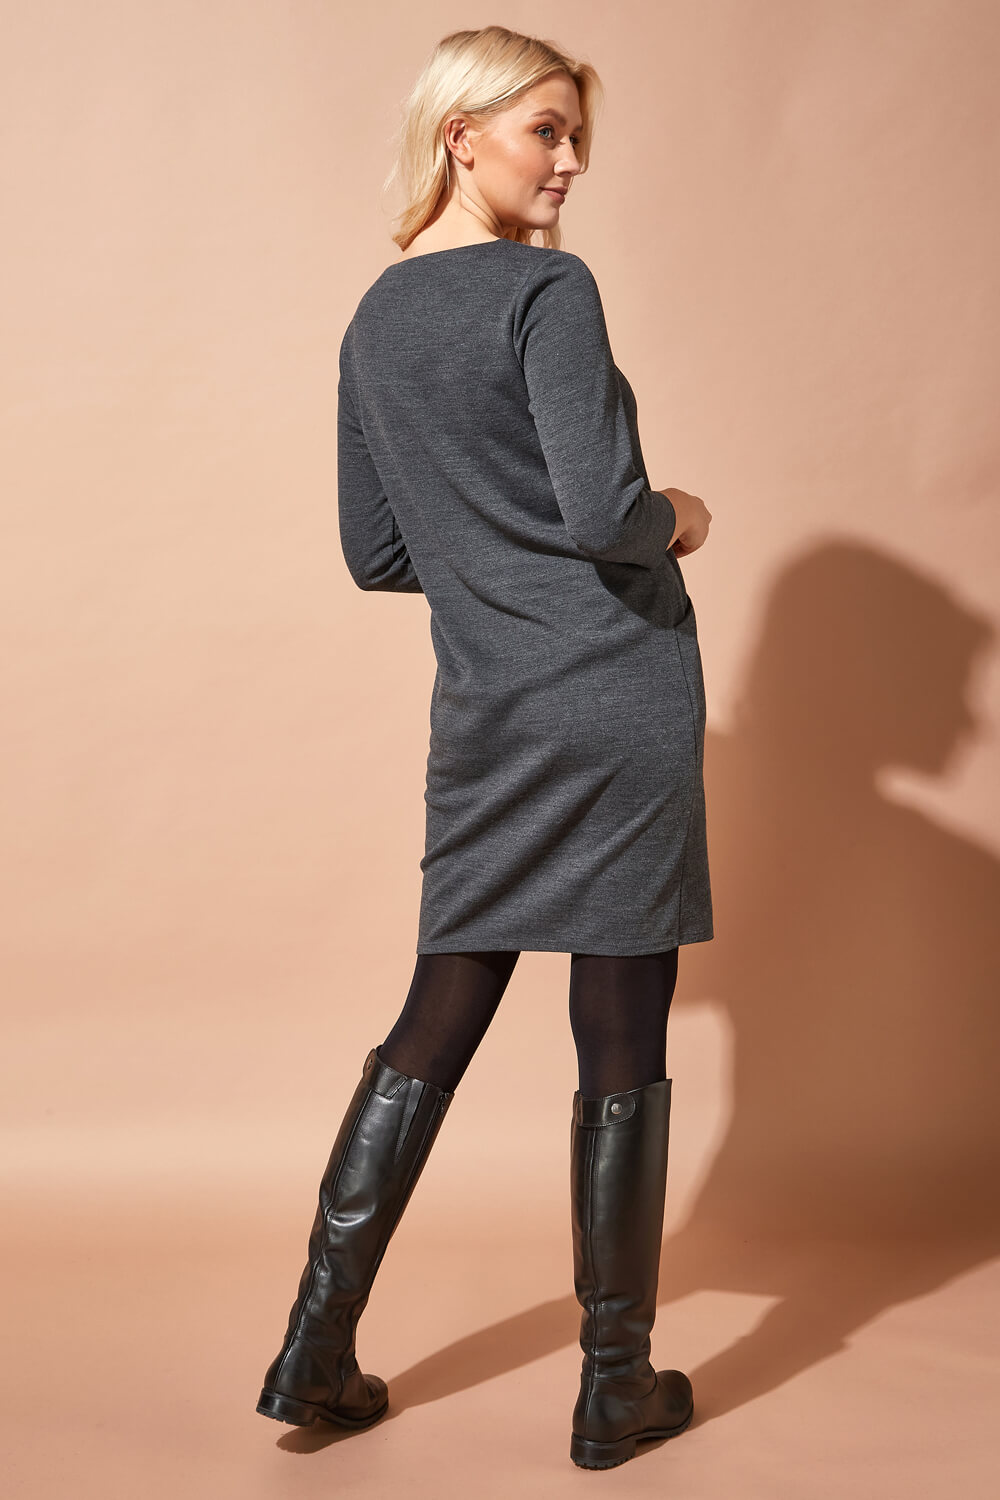 Charcoal Relaxed Sleeve Pocket Dress, Image 3 of 4